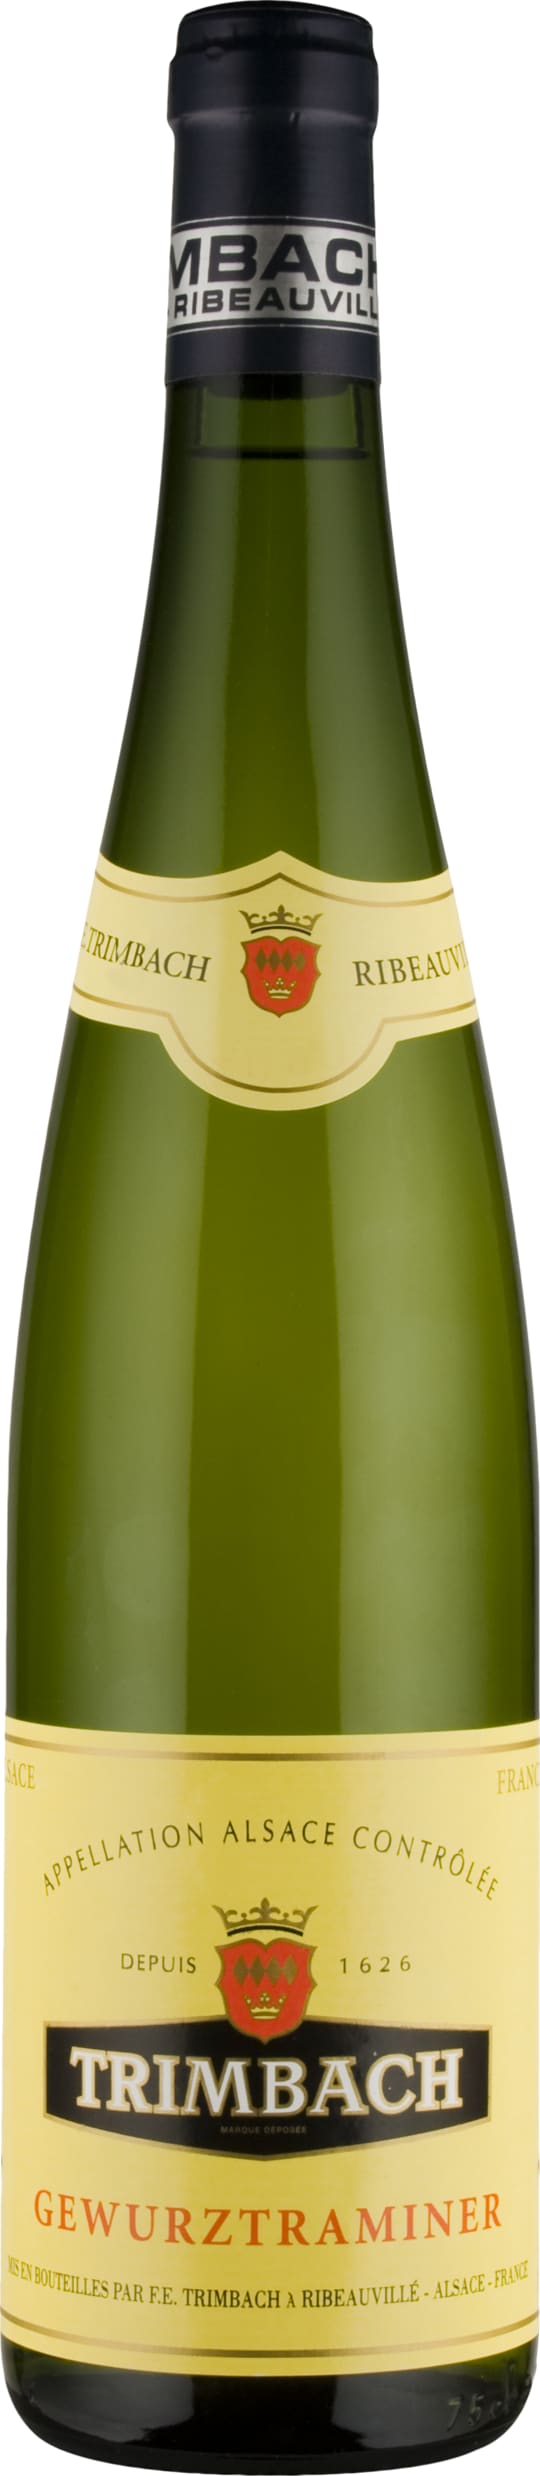 Trimbach Gewurztraminer 2019 75cl - Buy Trimbach Wines from GREAT WINES DIRECT wine shop